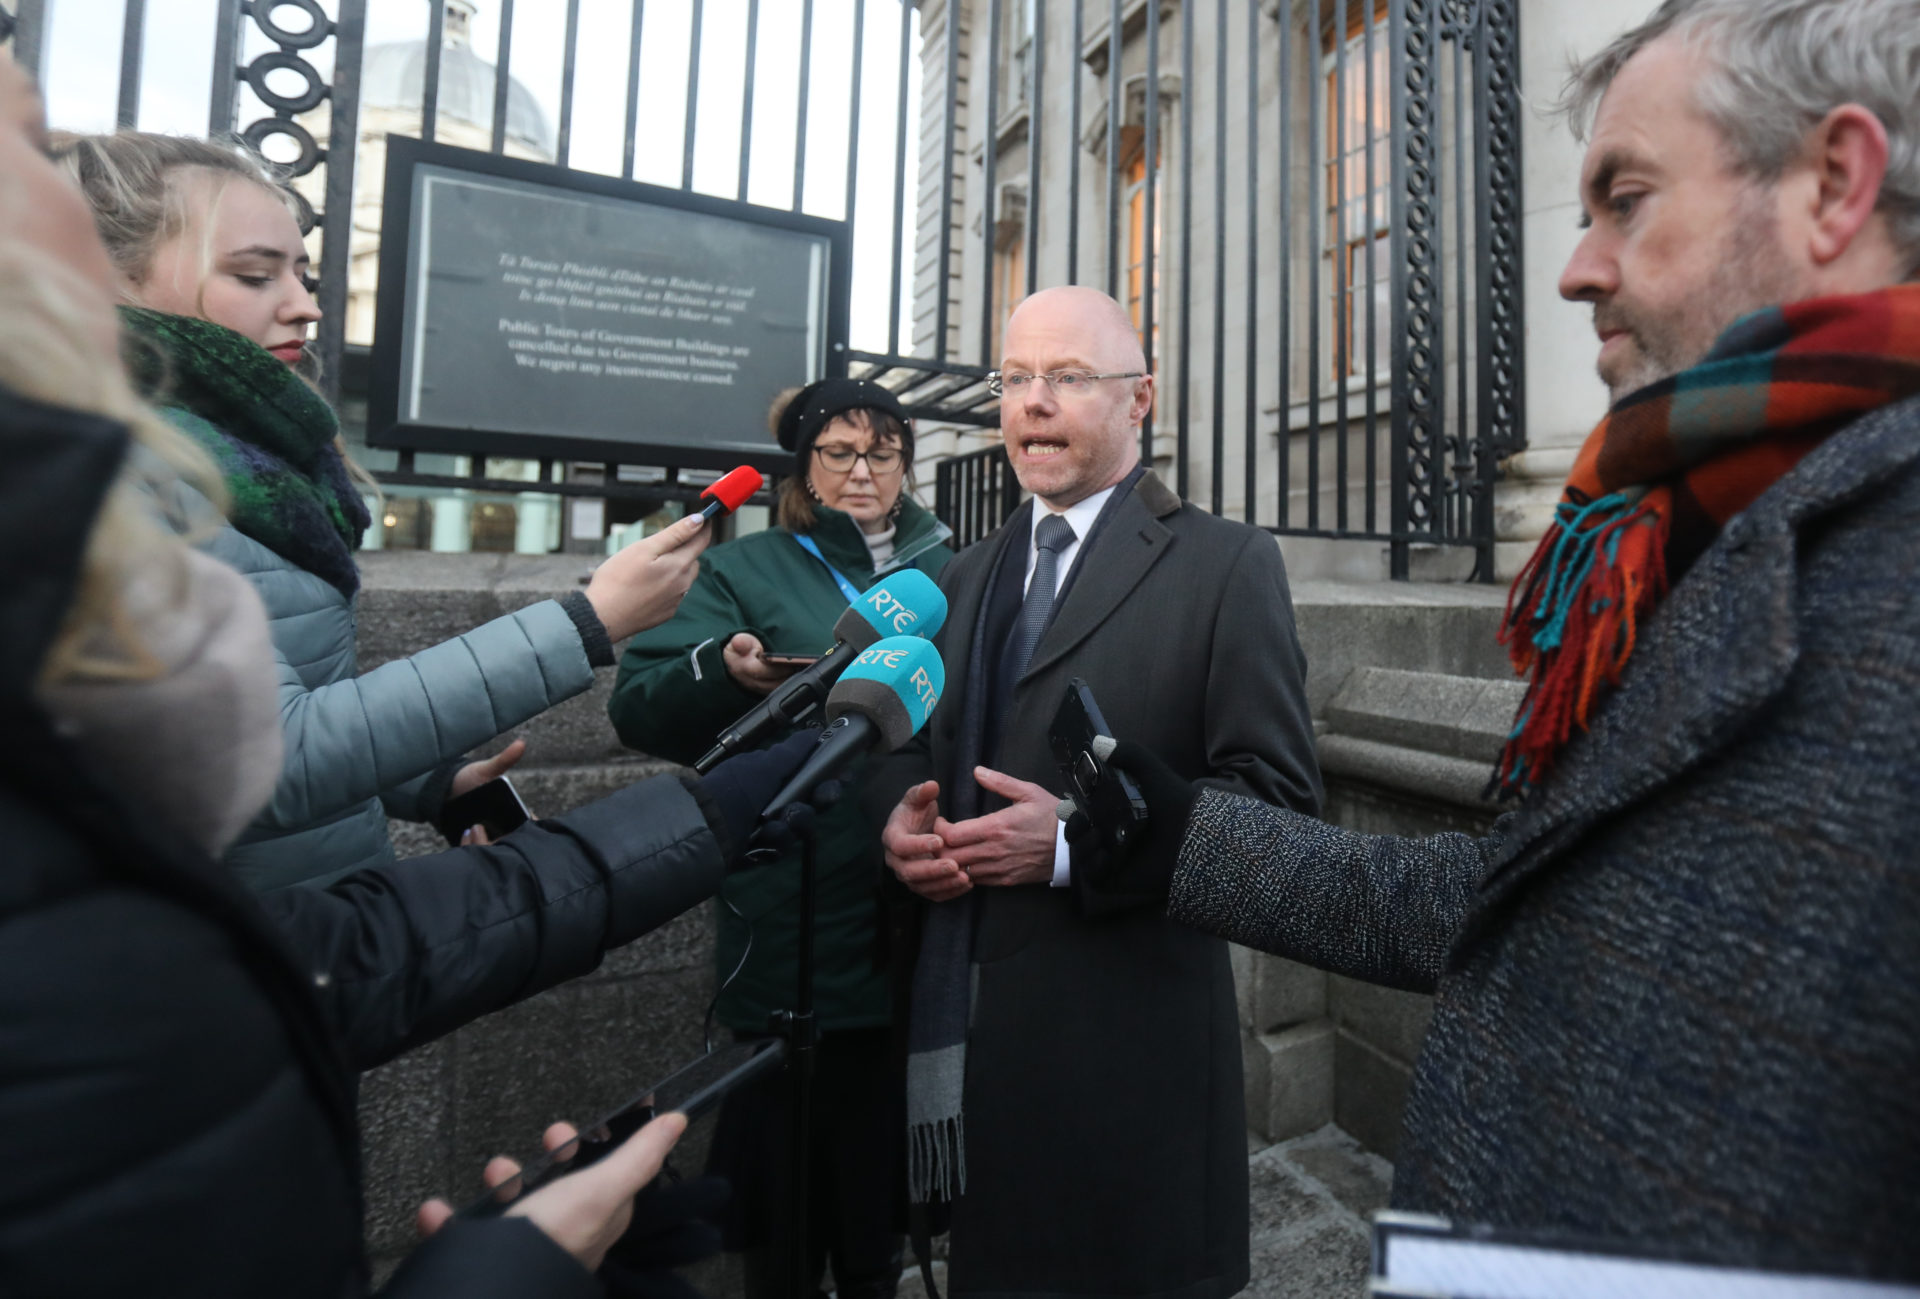 The Health Minister Stephen Donnelly speaking to the media outside Leinster House.